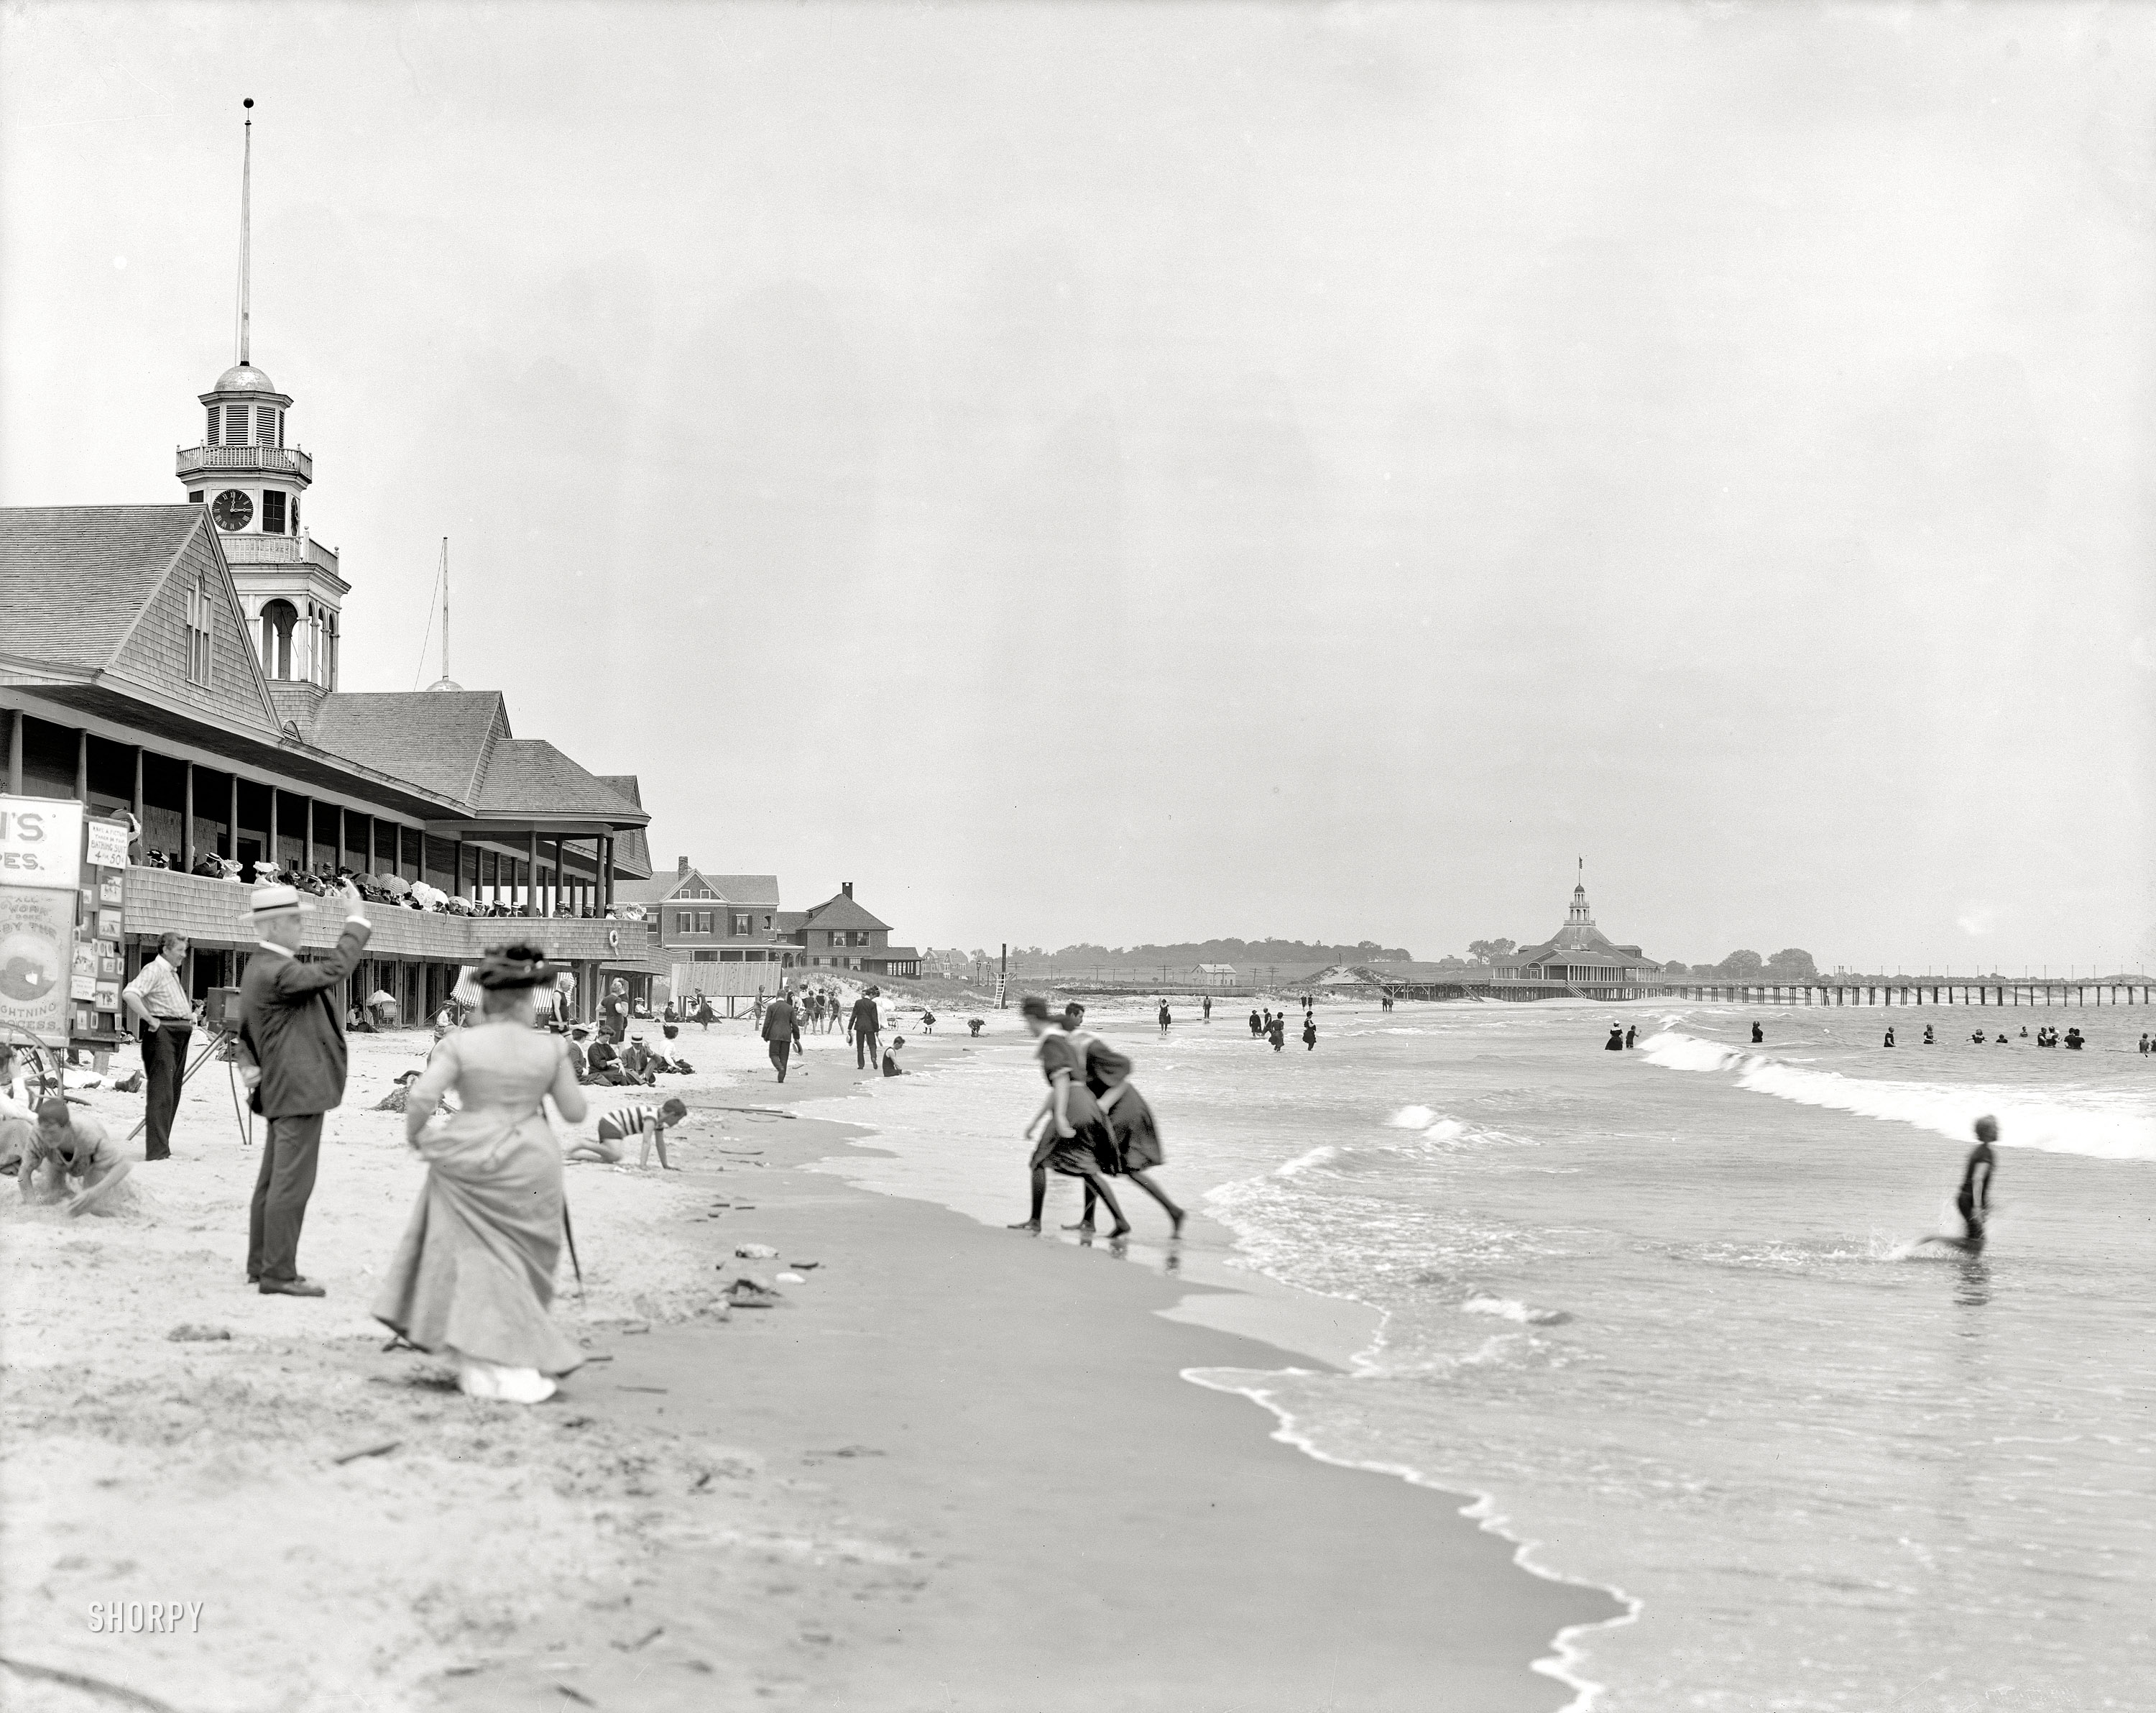 Rhode Island circa 1910. "Narragansett Pier bathing beach." Note the photographer and signage to the left: "Want a Picture Taken in Your BATHING SUIT? 4 for 50 cents -- All Work Done by the LIGHTNING PROCESS." 8x10 inch dry plate glass negative, Detroit Publishing Company. View full size.